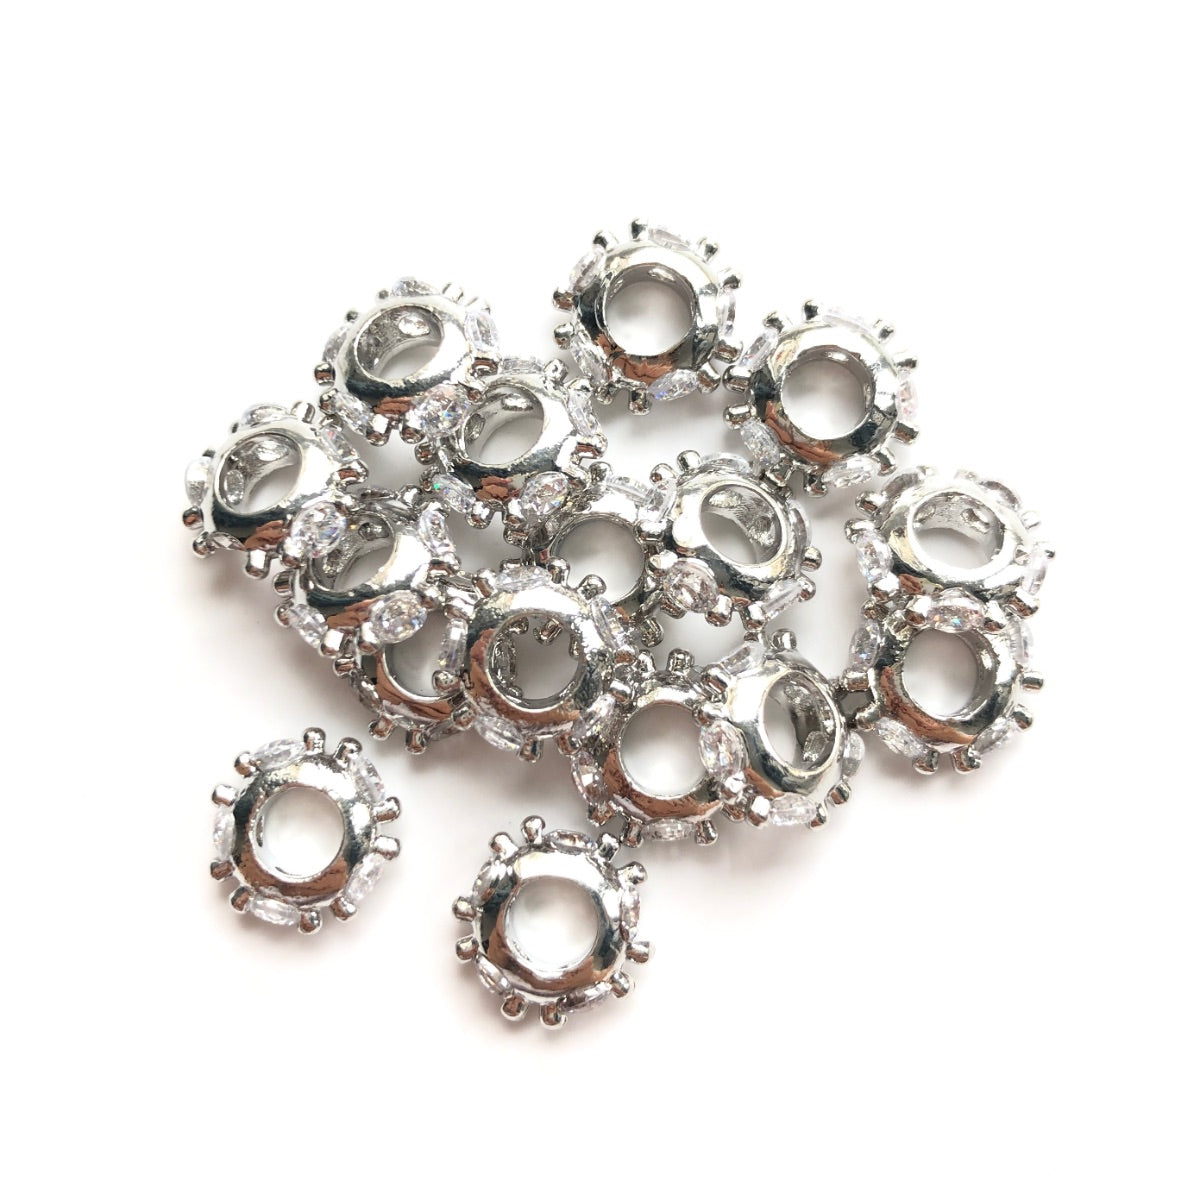 20pcs/lot 10*3mm Big Size CZ Pave Wheel Rondelle Spacers Silver CZ Paved Spacers New Spacers Arrivals Rondelle Beads Charms Beads Beyond